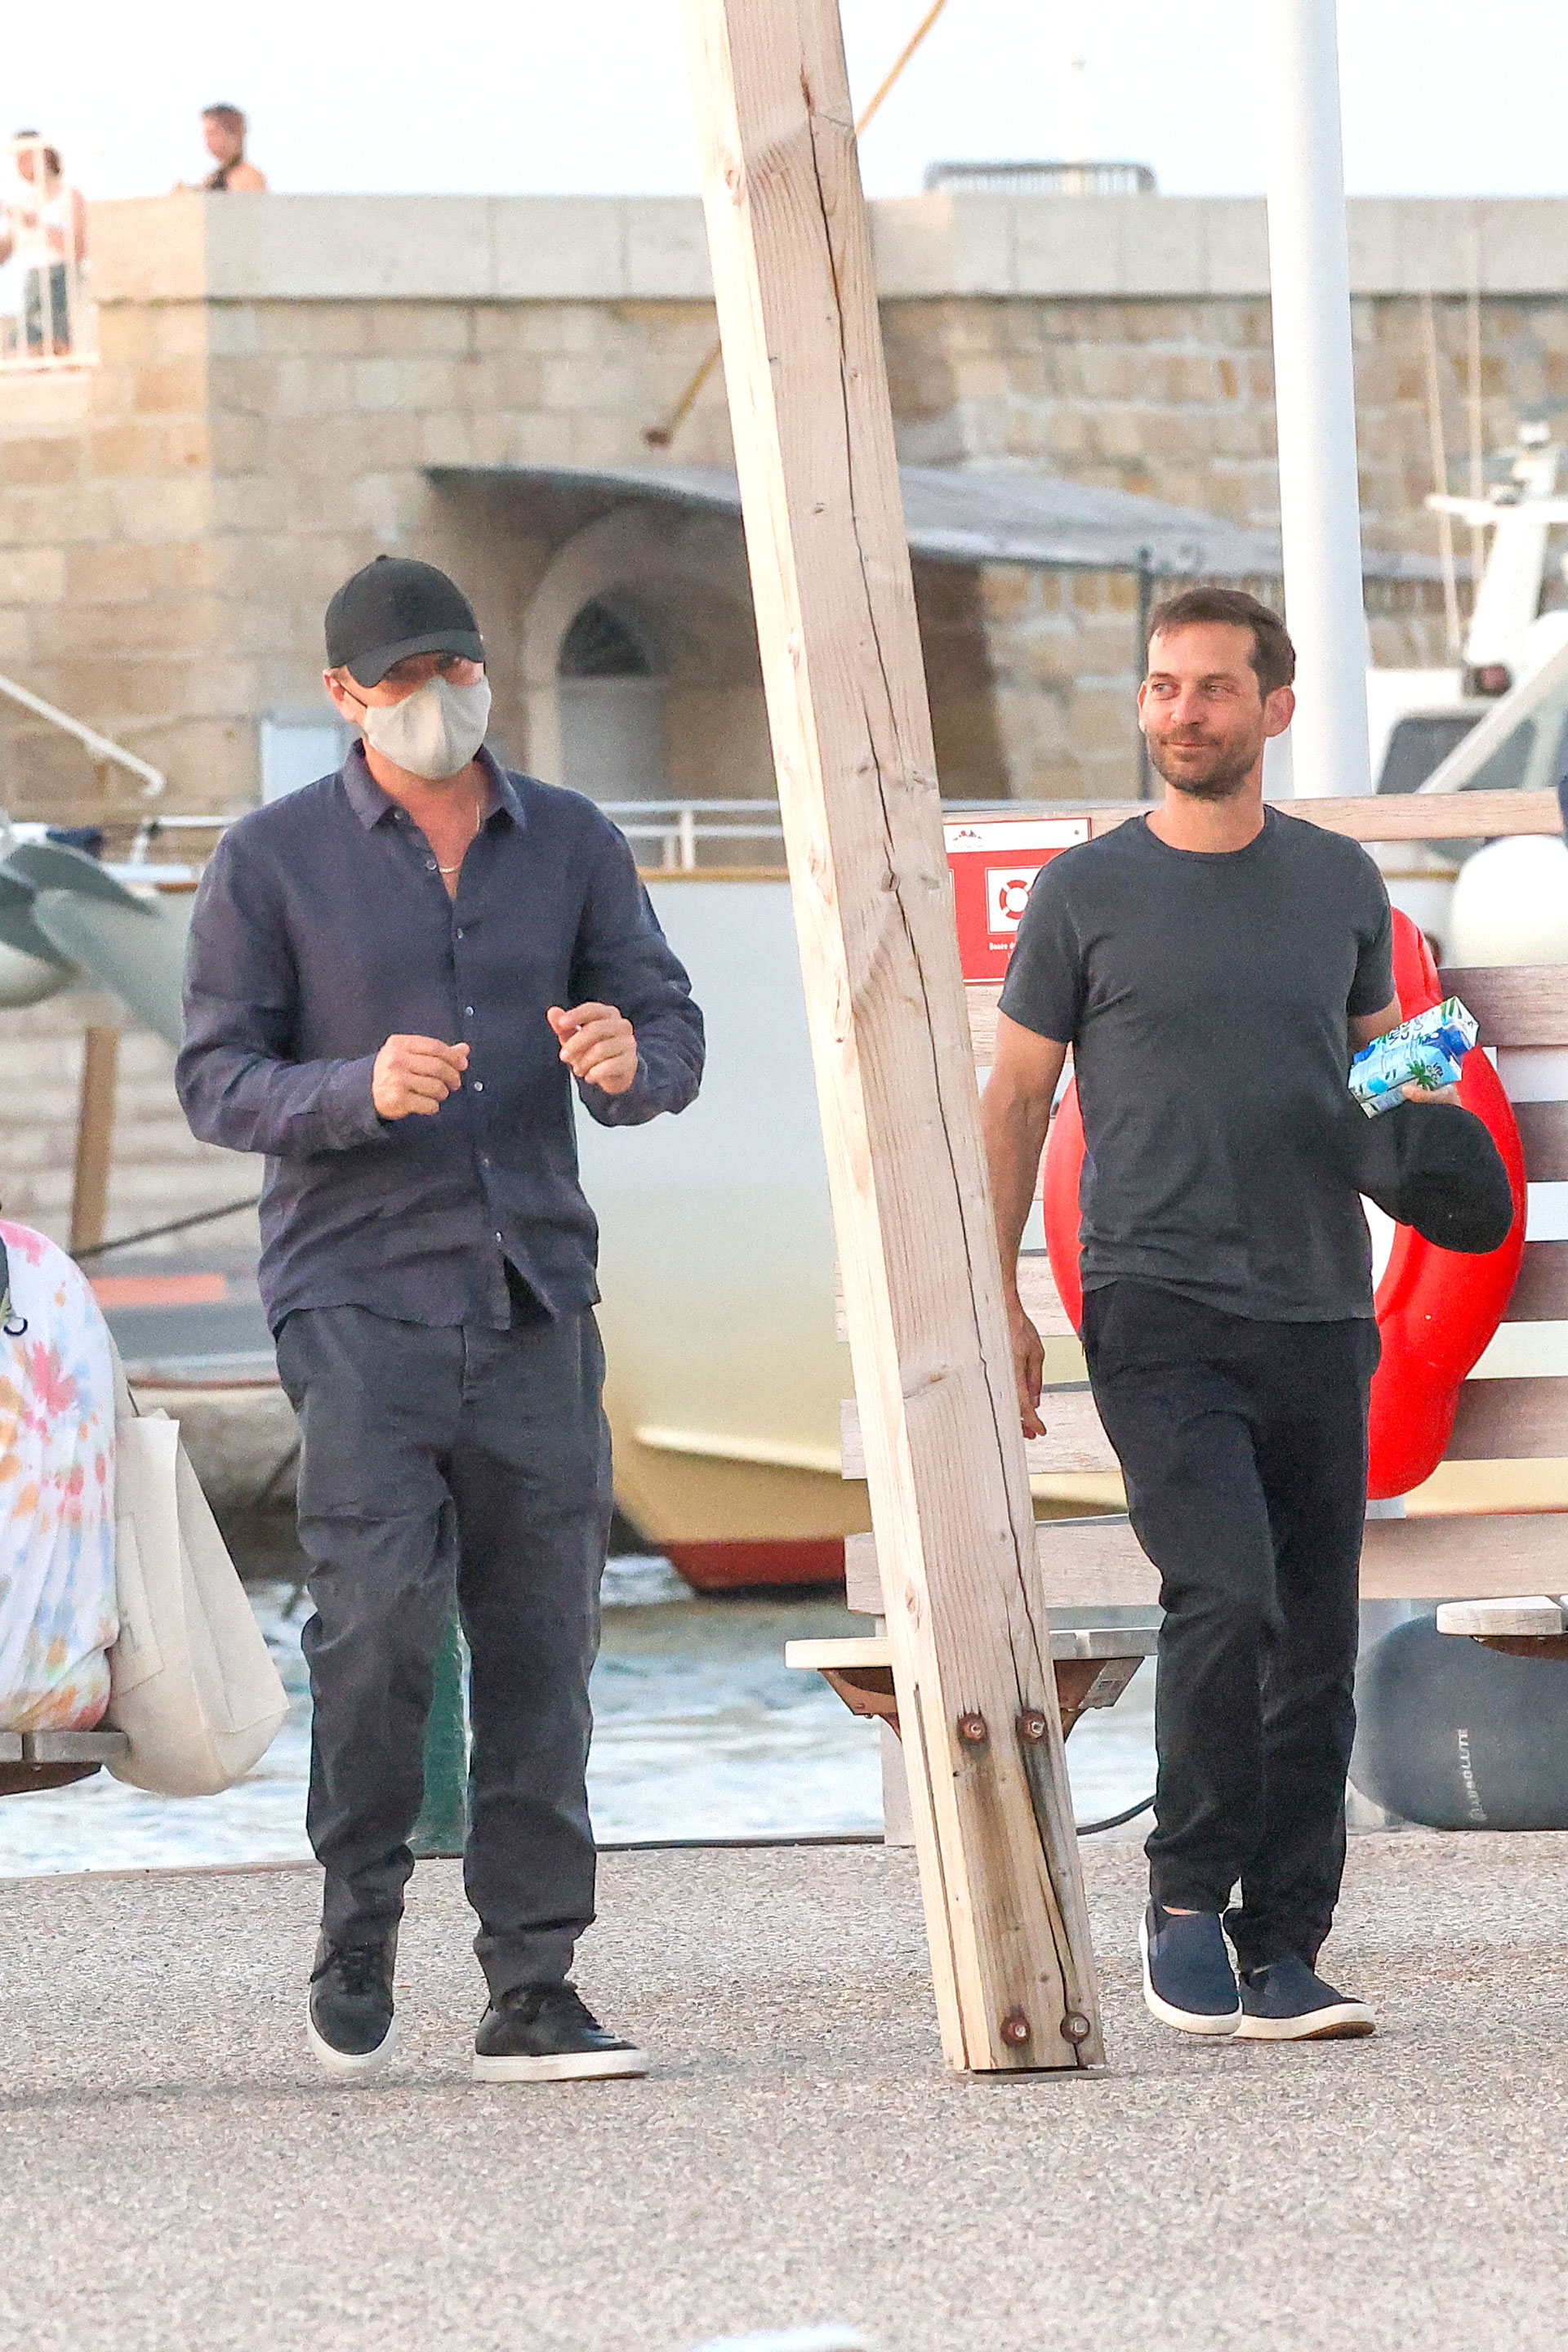 Leonardo DiCaprio and Tobey Maguire stroll through the streets of Saint-Tropez during their trip with friends